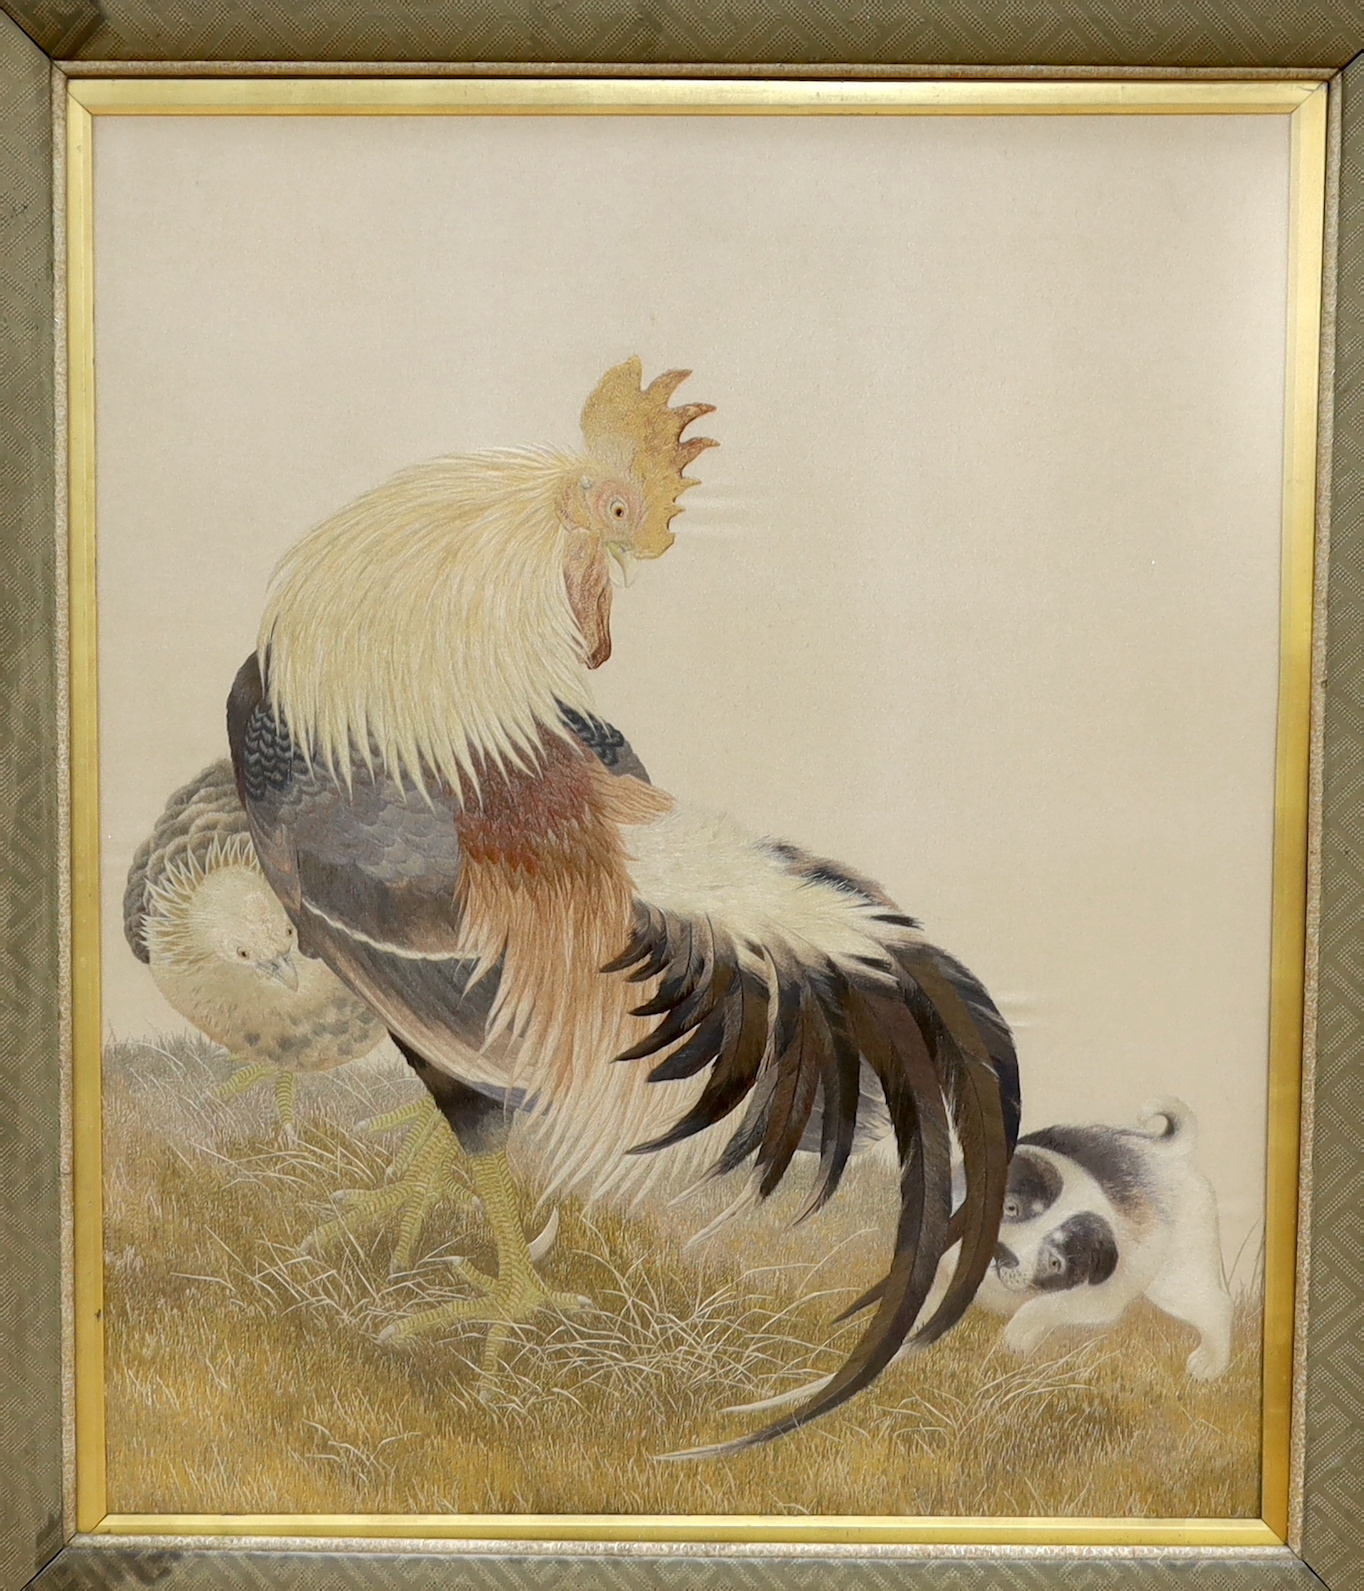 A large framed early 20th century Japanese silk polychrome embroidery of a cockerel, it’s chick and puppy by the chicken’s tail feathers, 63cm wide x 75cm high, not including mount or frame